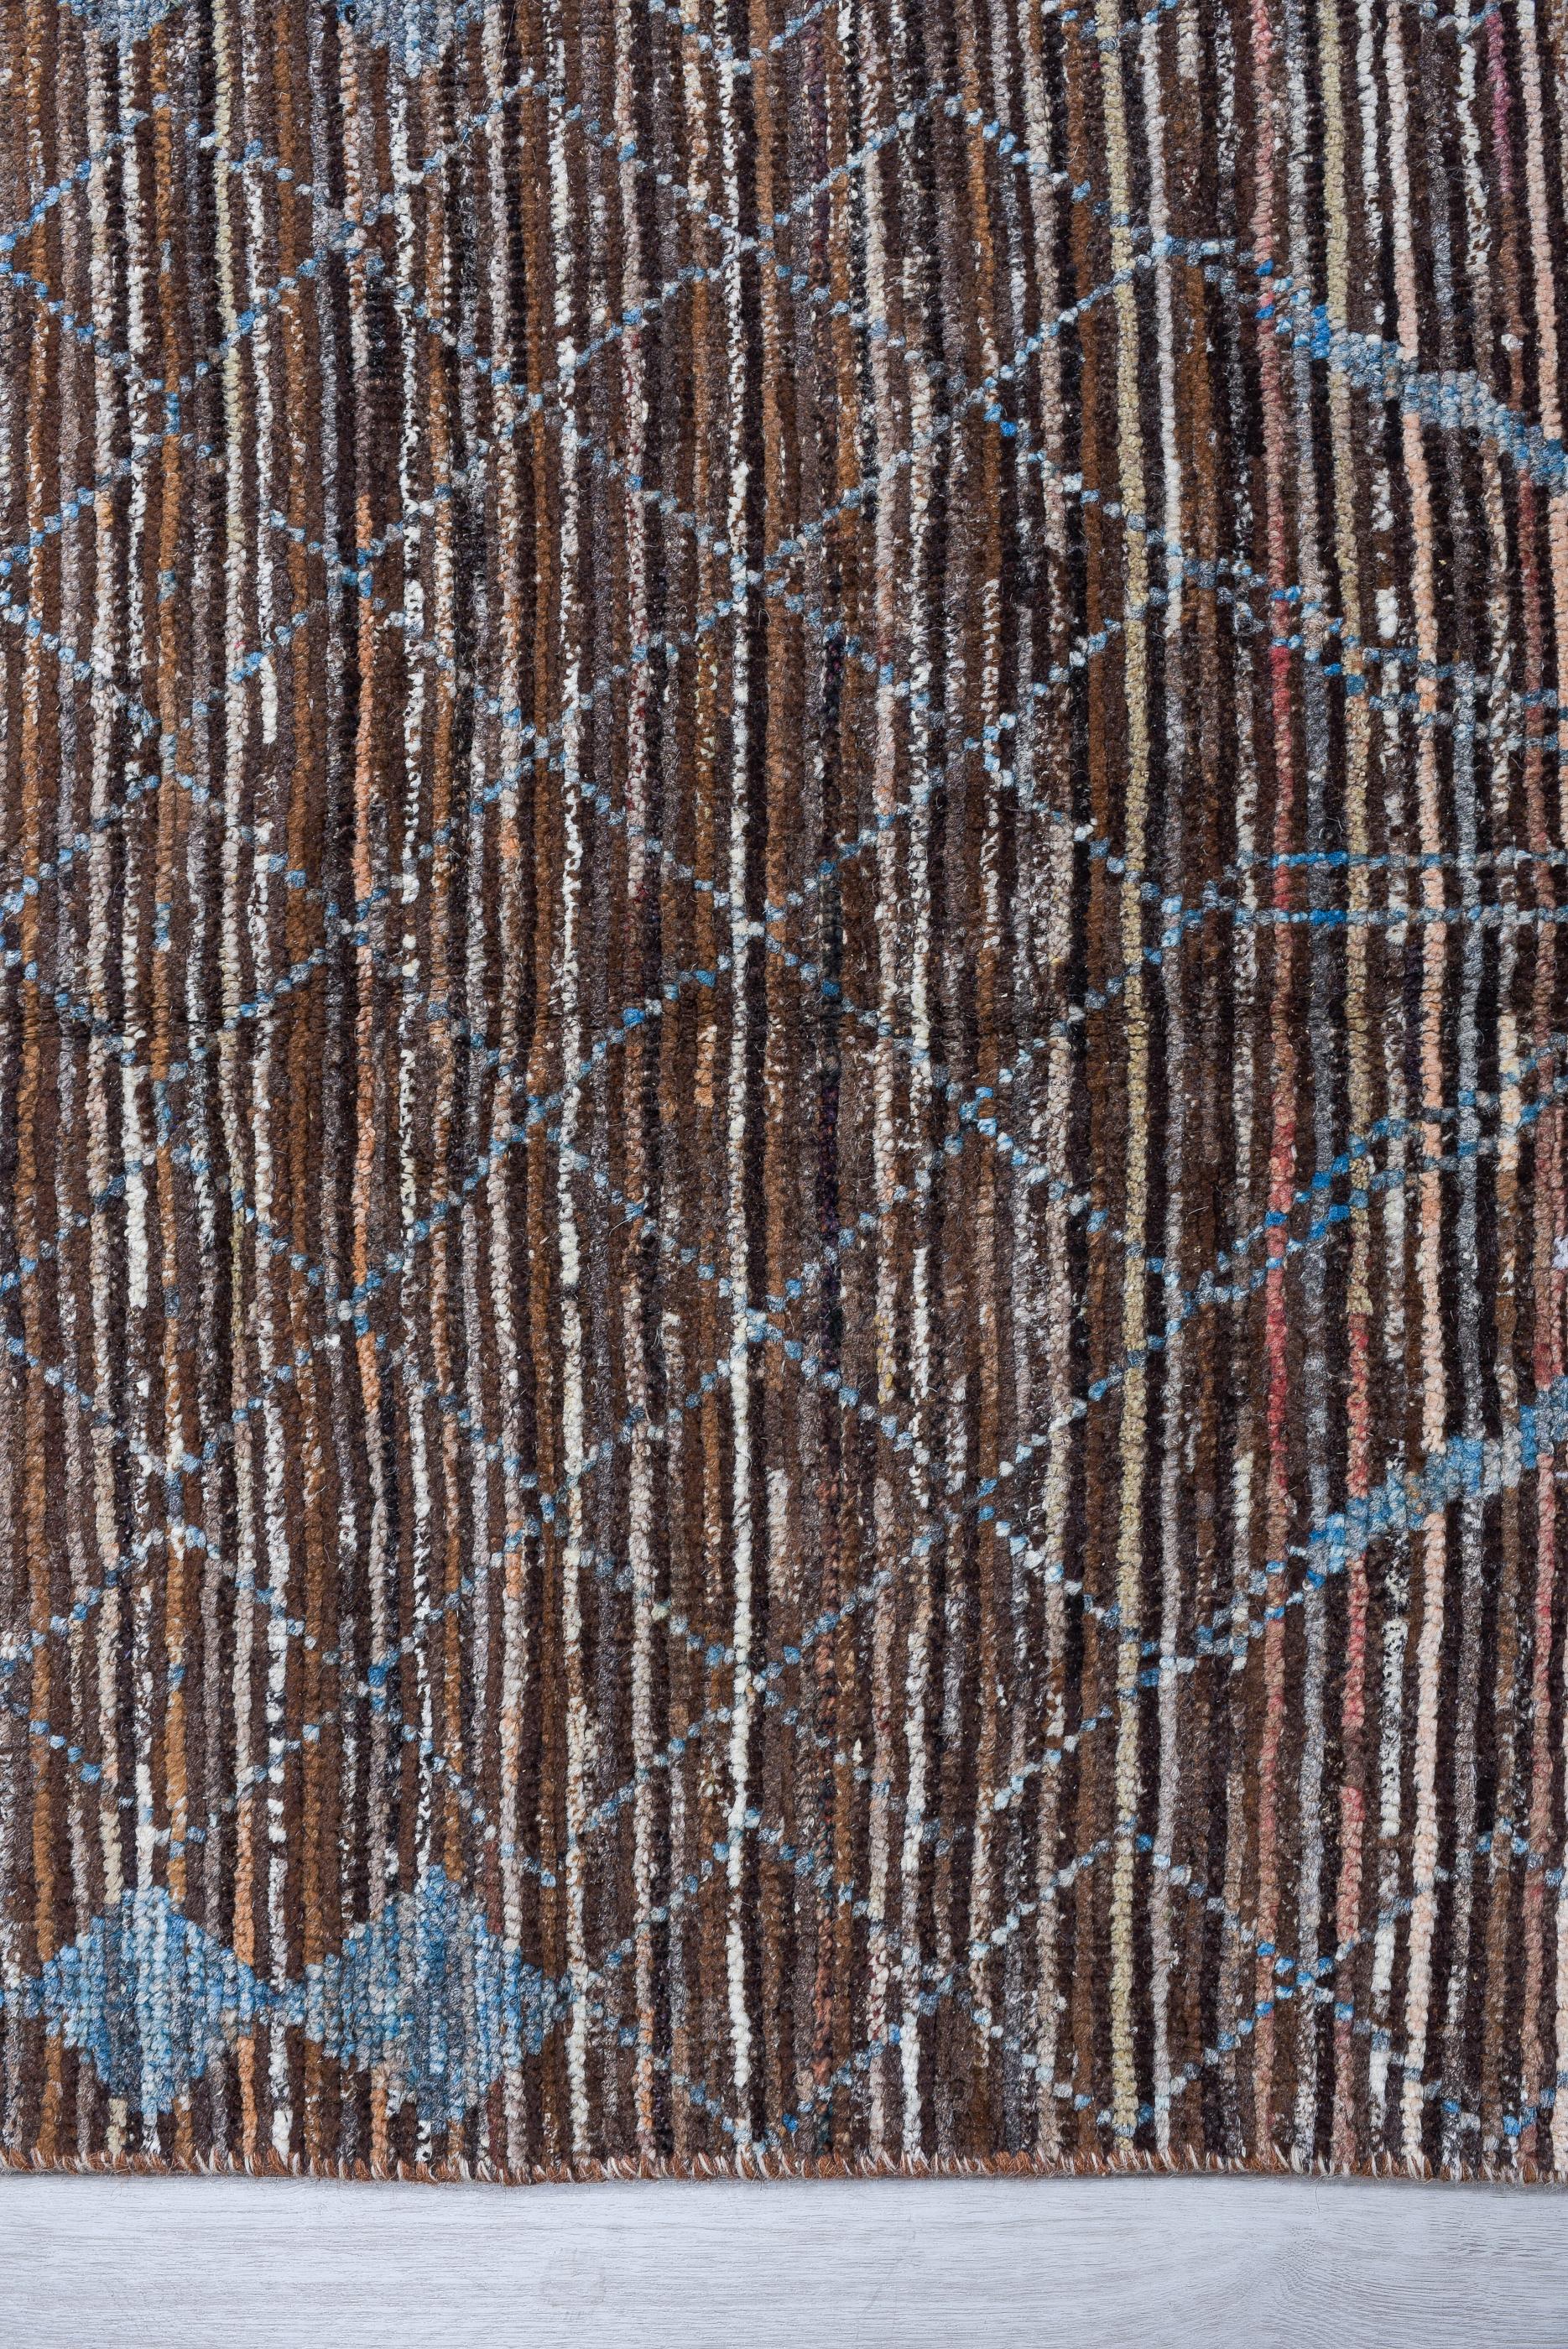 Afghan Azure Blue on Rocky Brown with Village Weavings For Sale